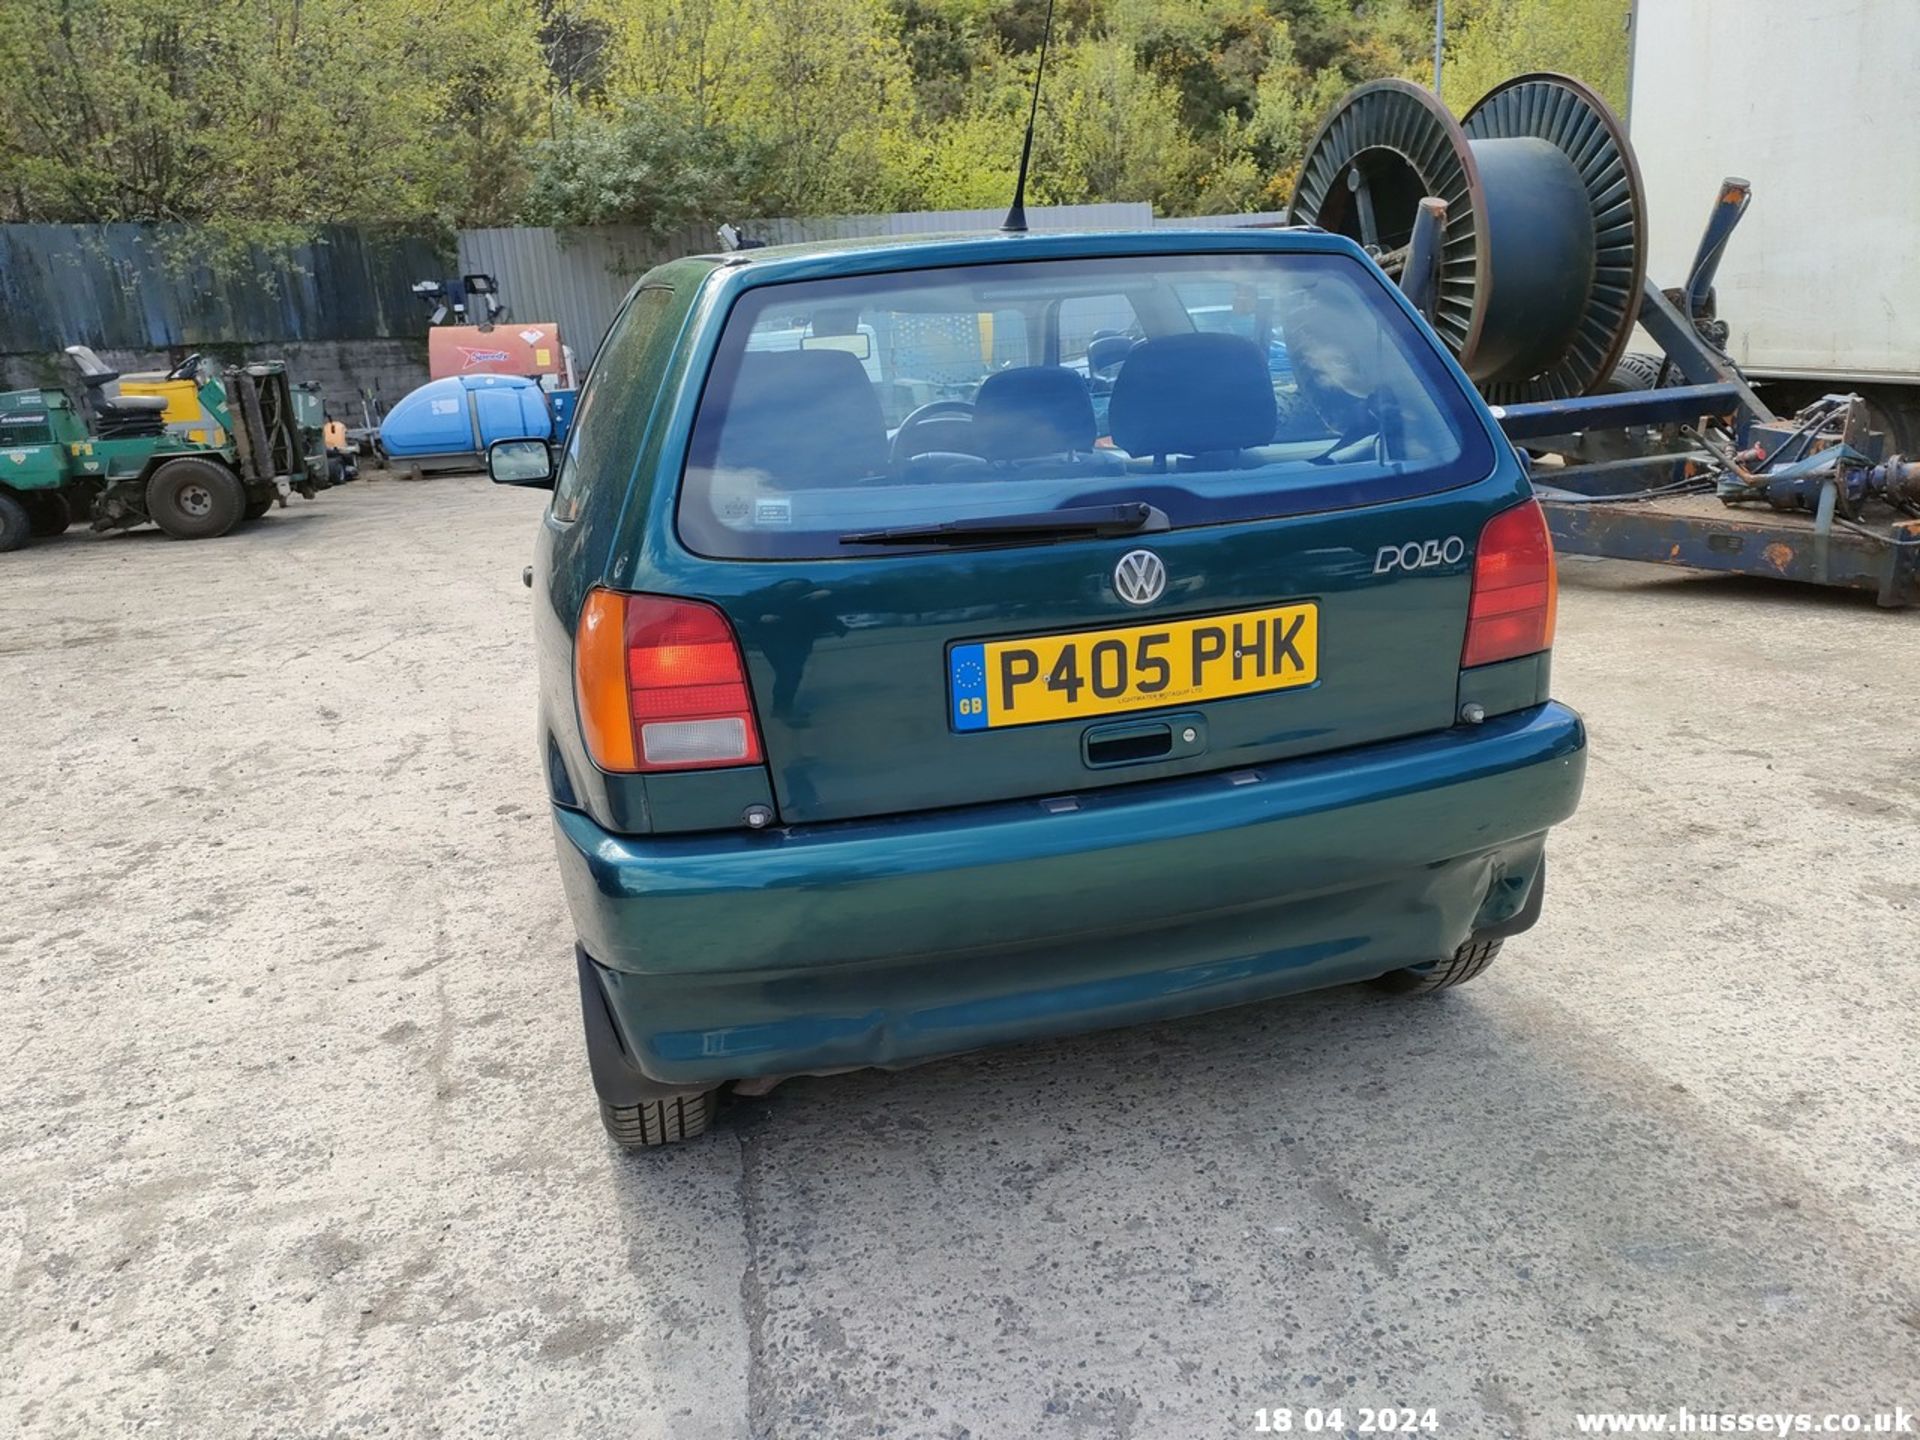 1997 VOLKSWAGEN POLO 1.4 CL AUTO - 1390cc 3dr Hatchback (Green, 68k) - Image 30 of 60